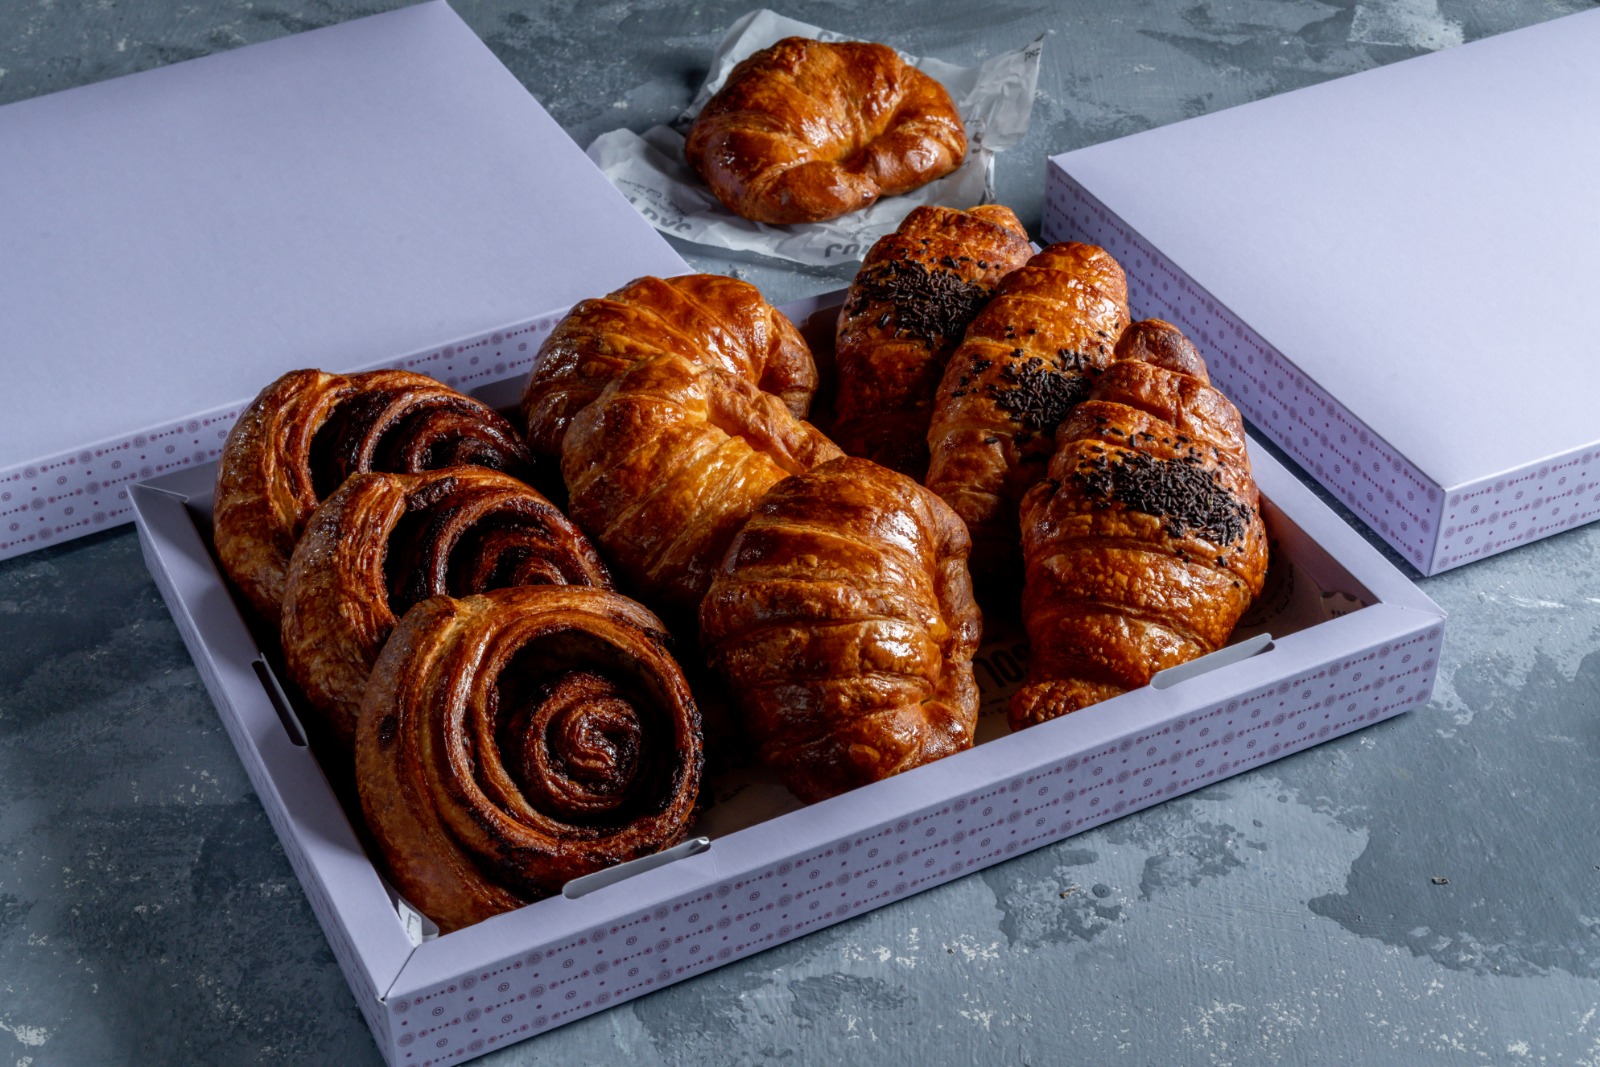 A tray of freshly breakfast pastries from the bakery